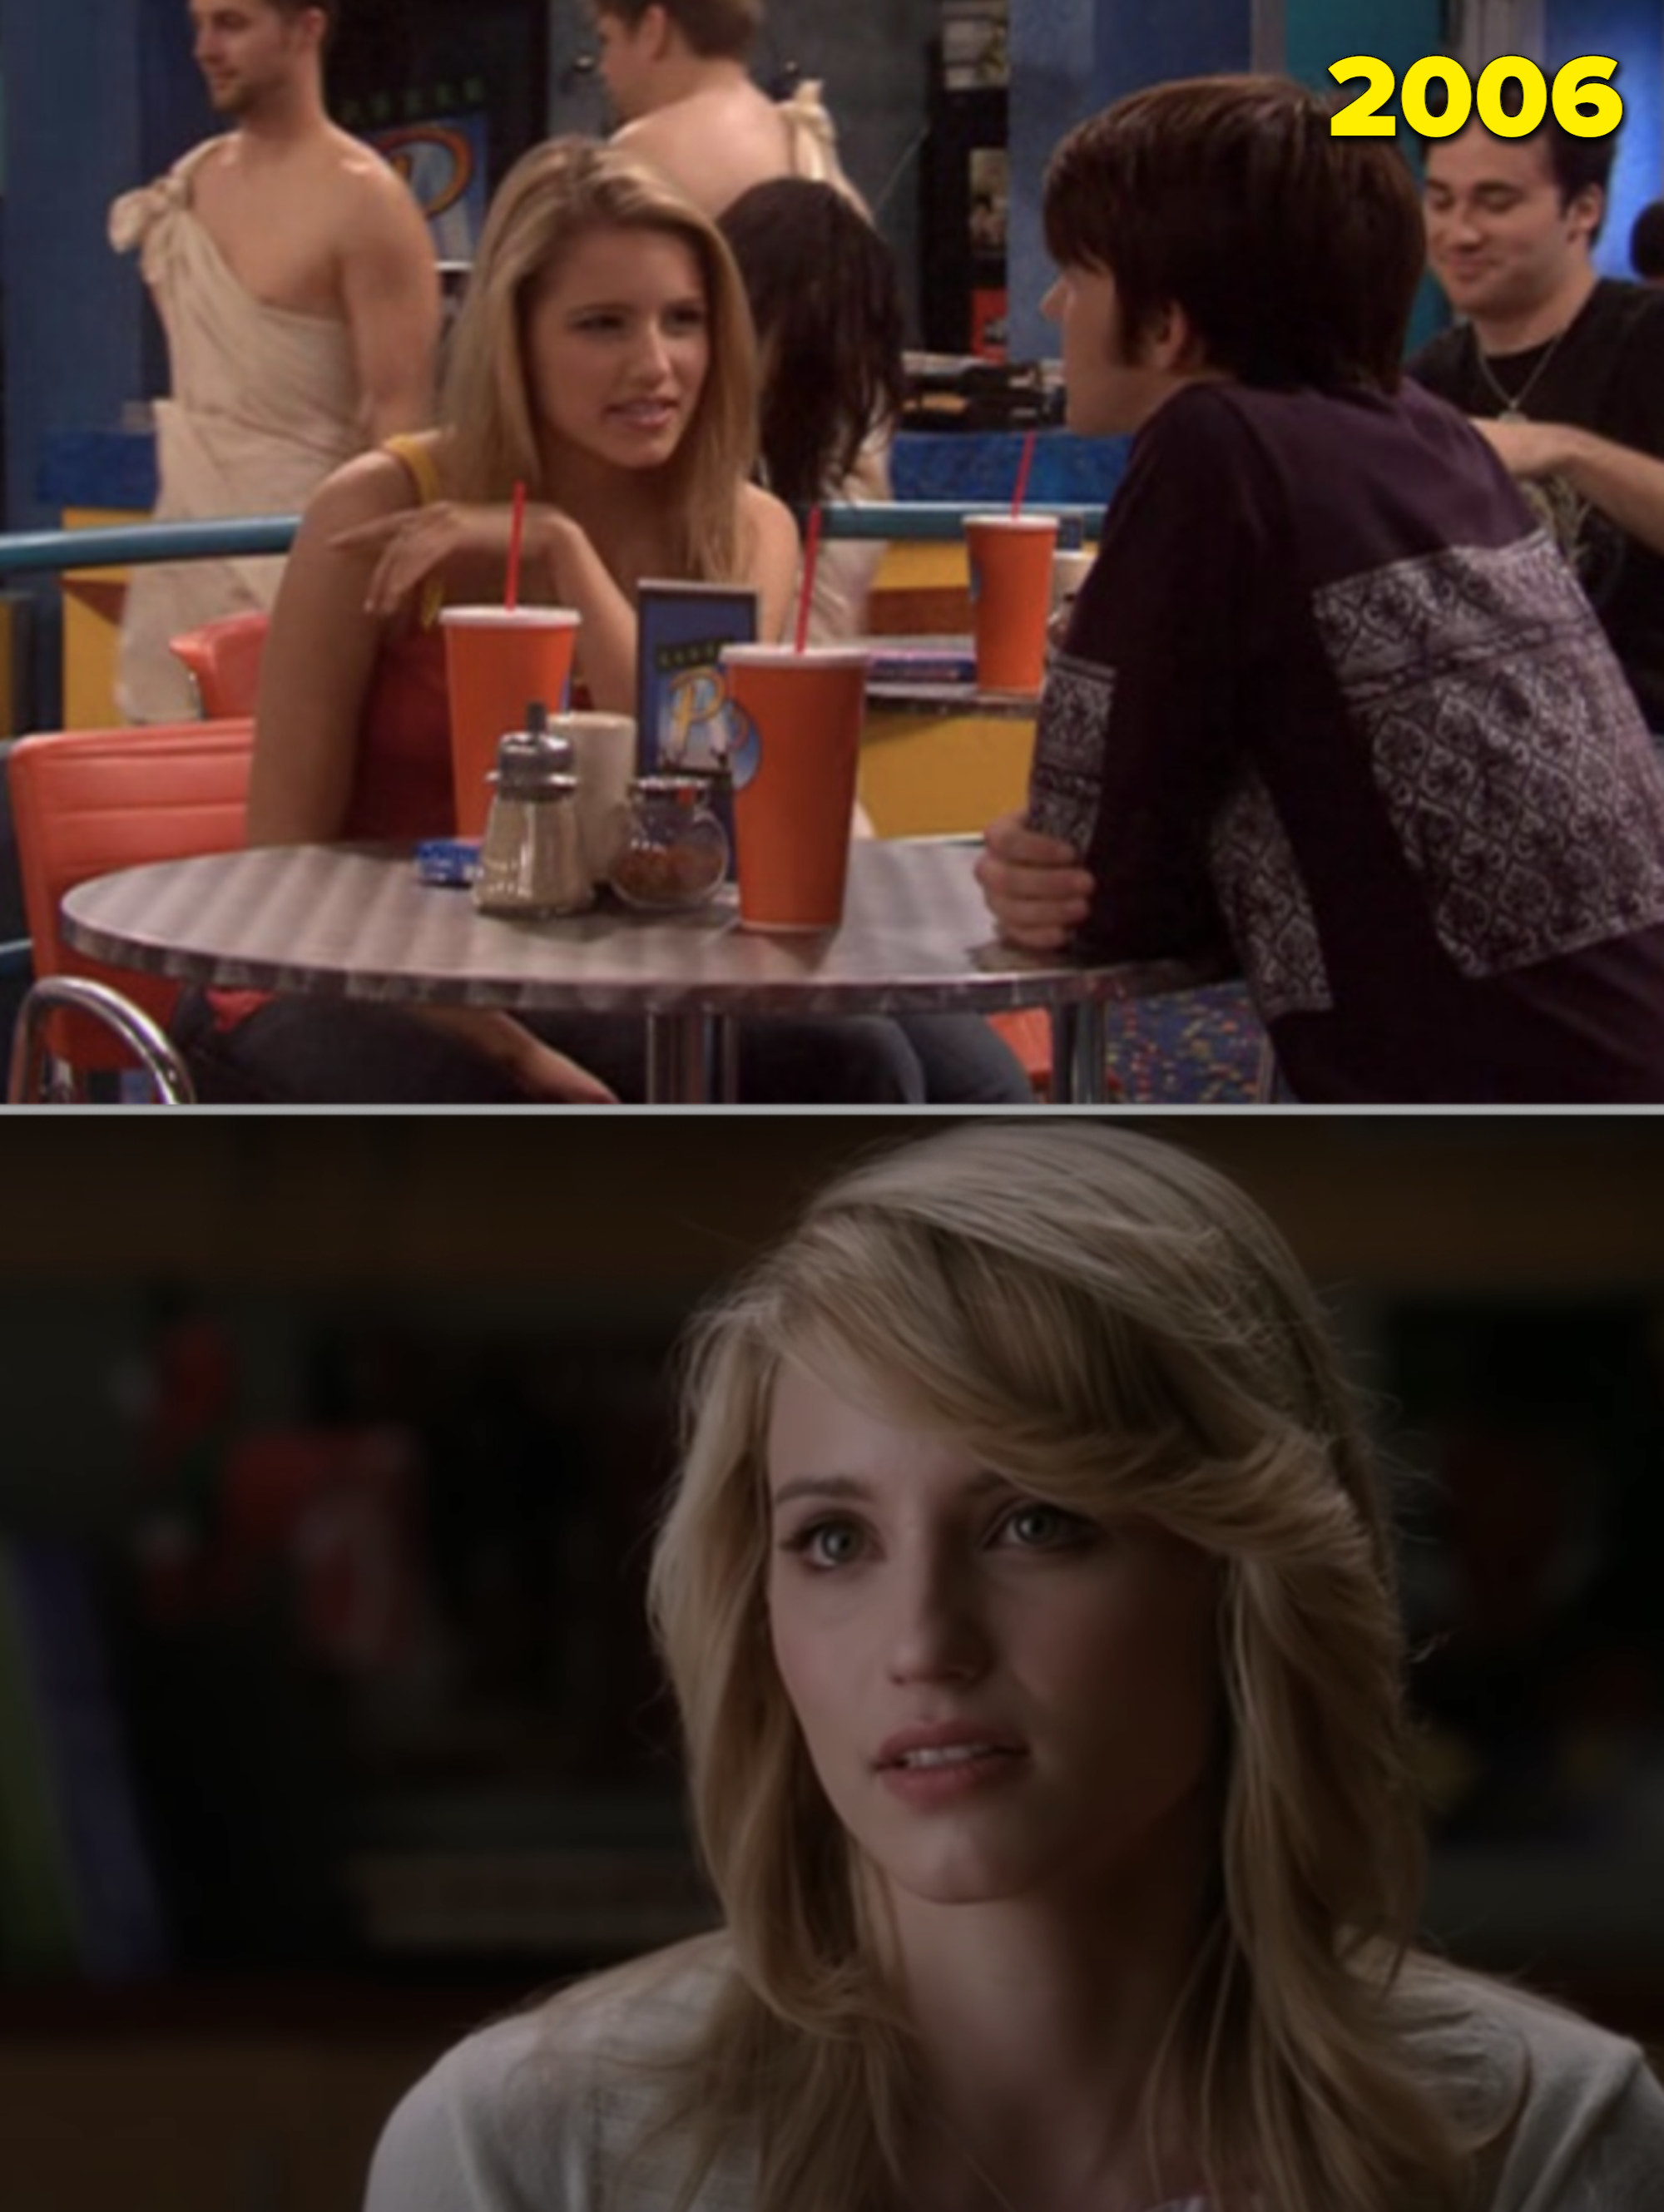 Dianna Agron at the movie theater and in &quot;Glee&quot;